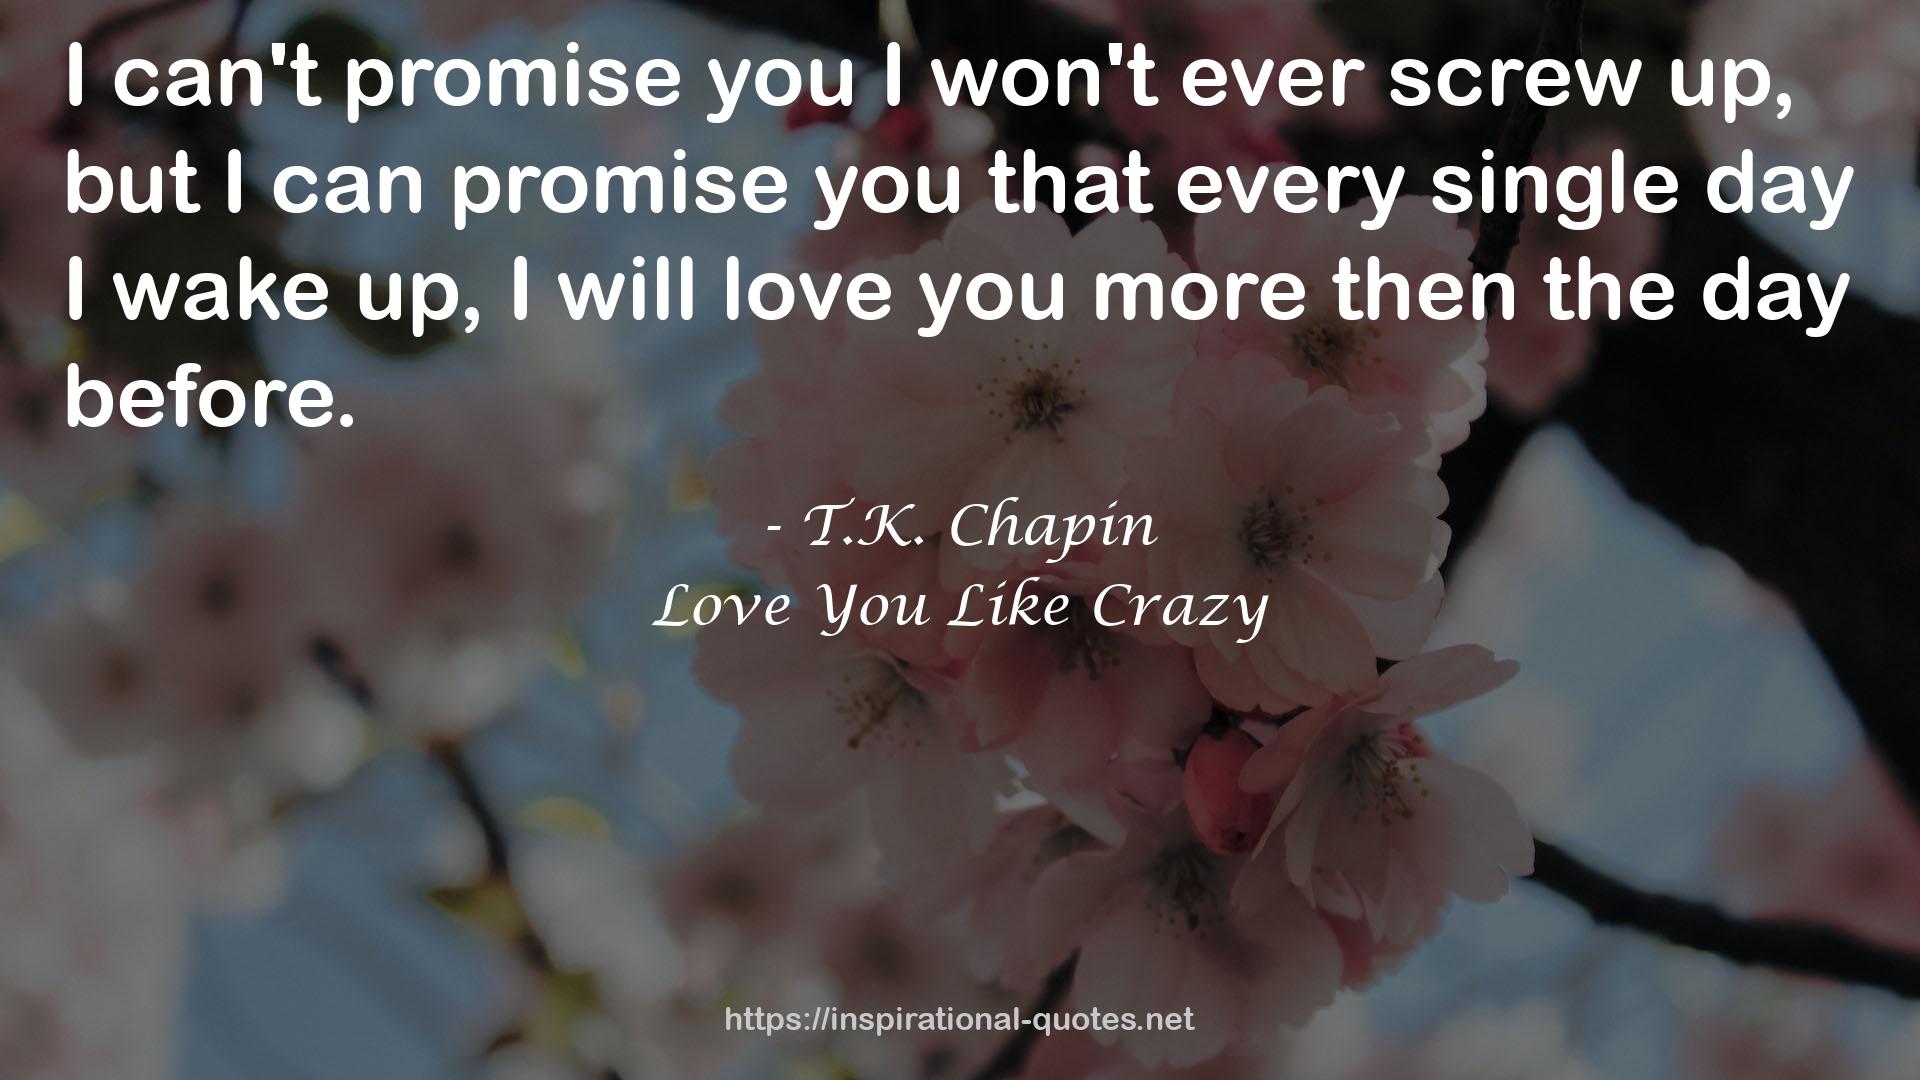 Love You Like Crazy QUOTES